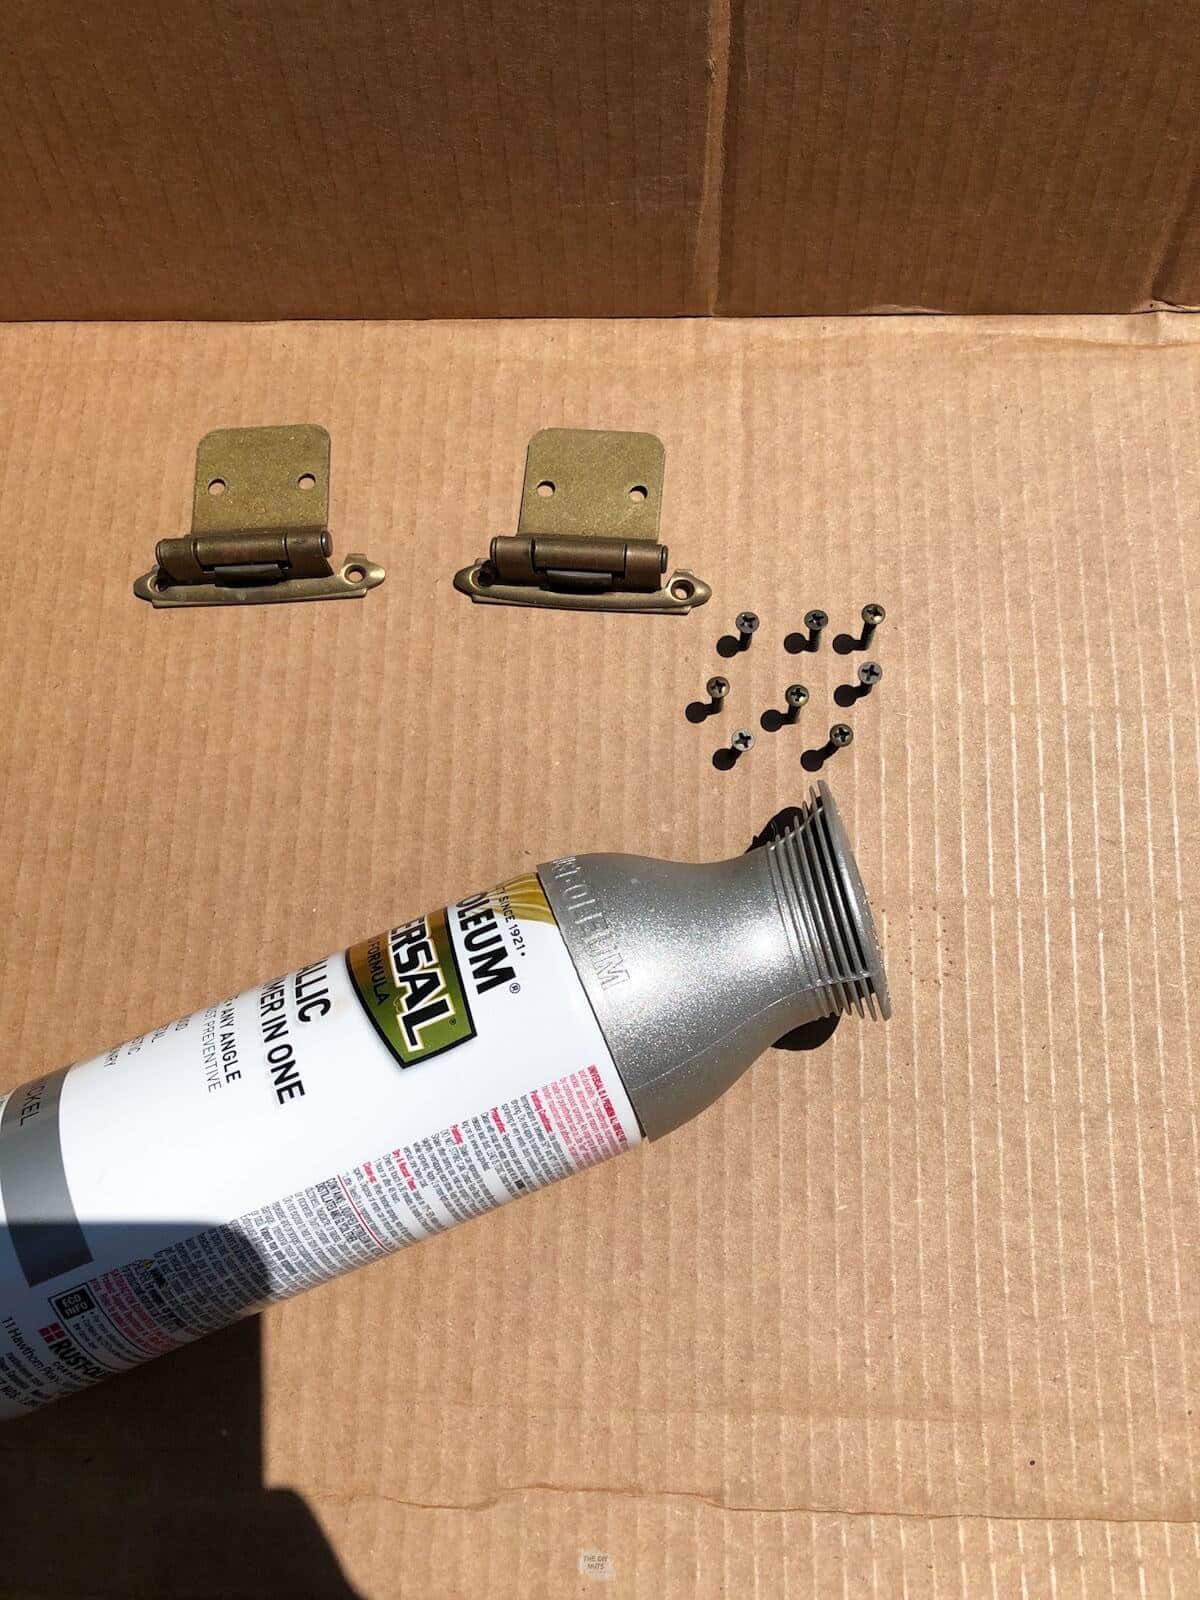 Silver spray paint laying on cardboard with hinges and screws stuck in cardboard.